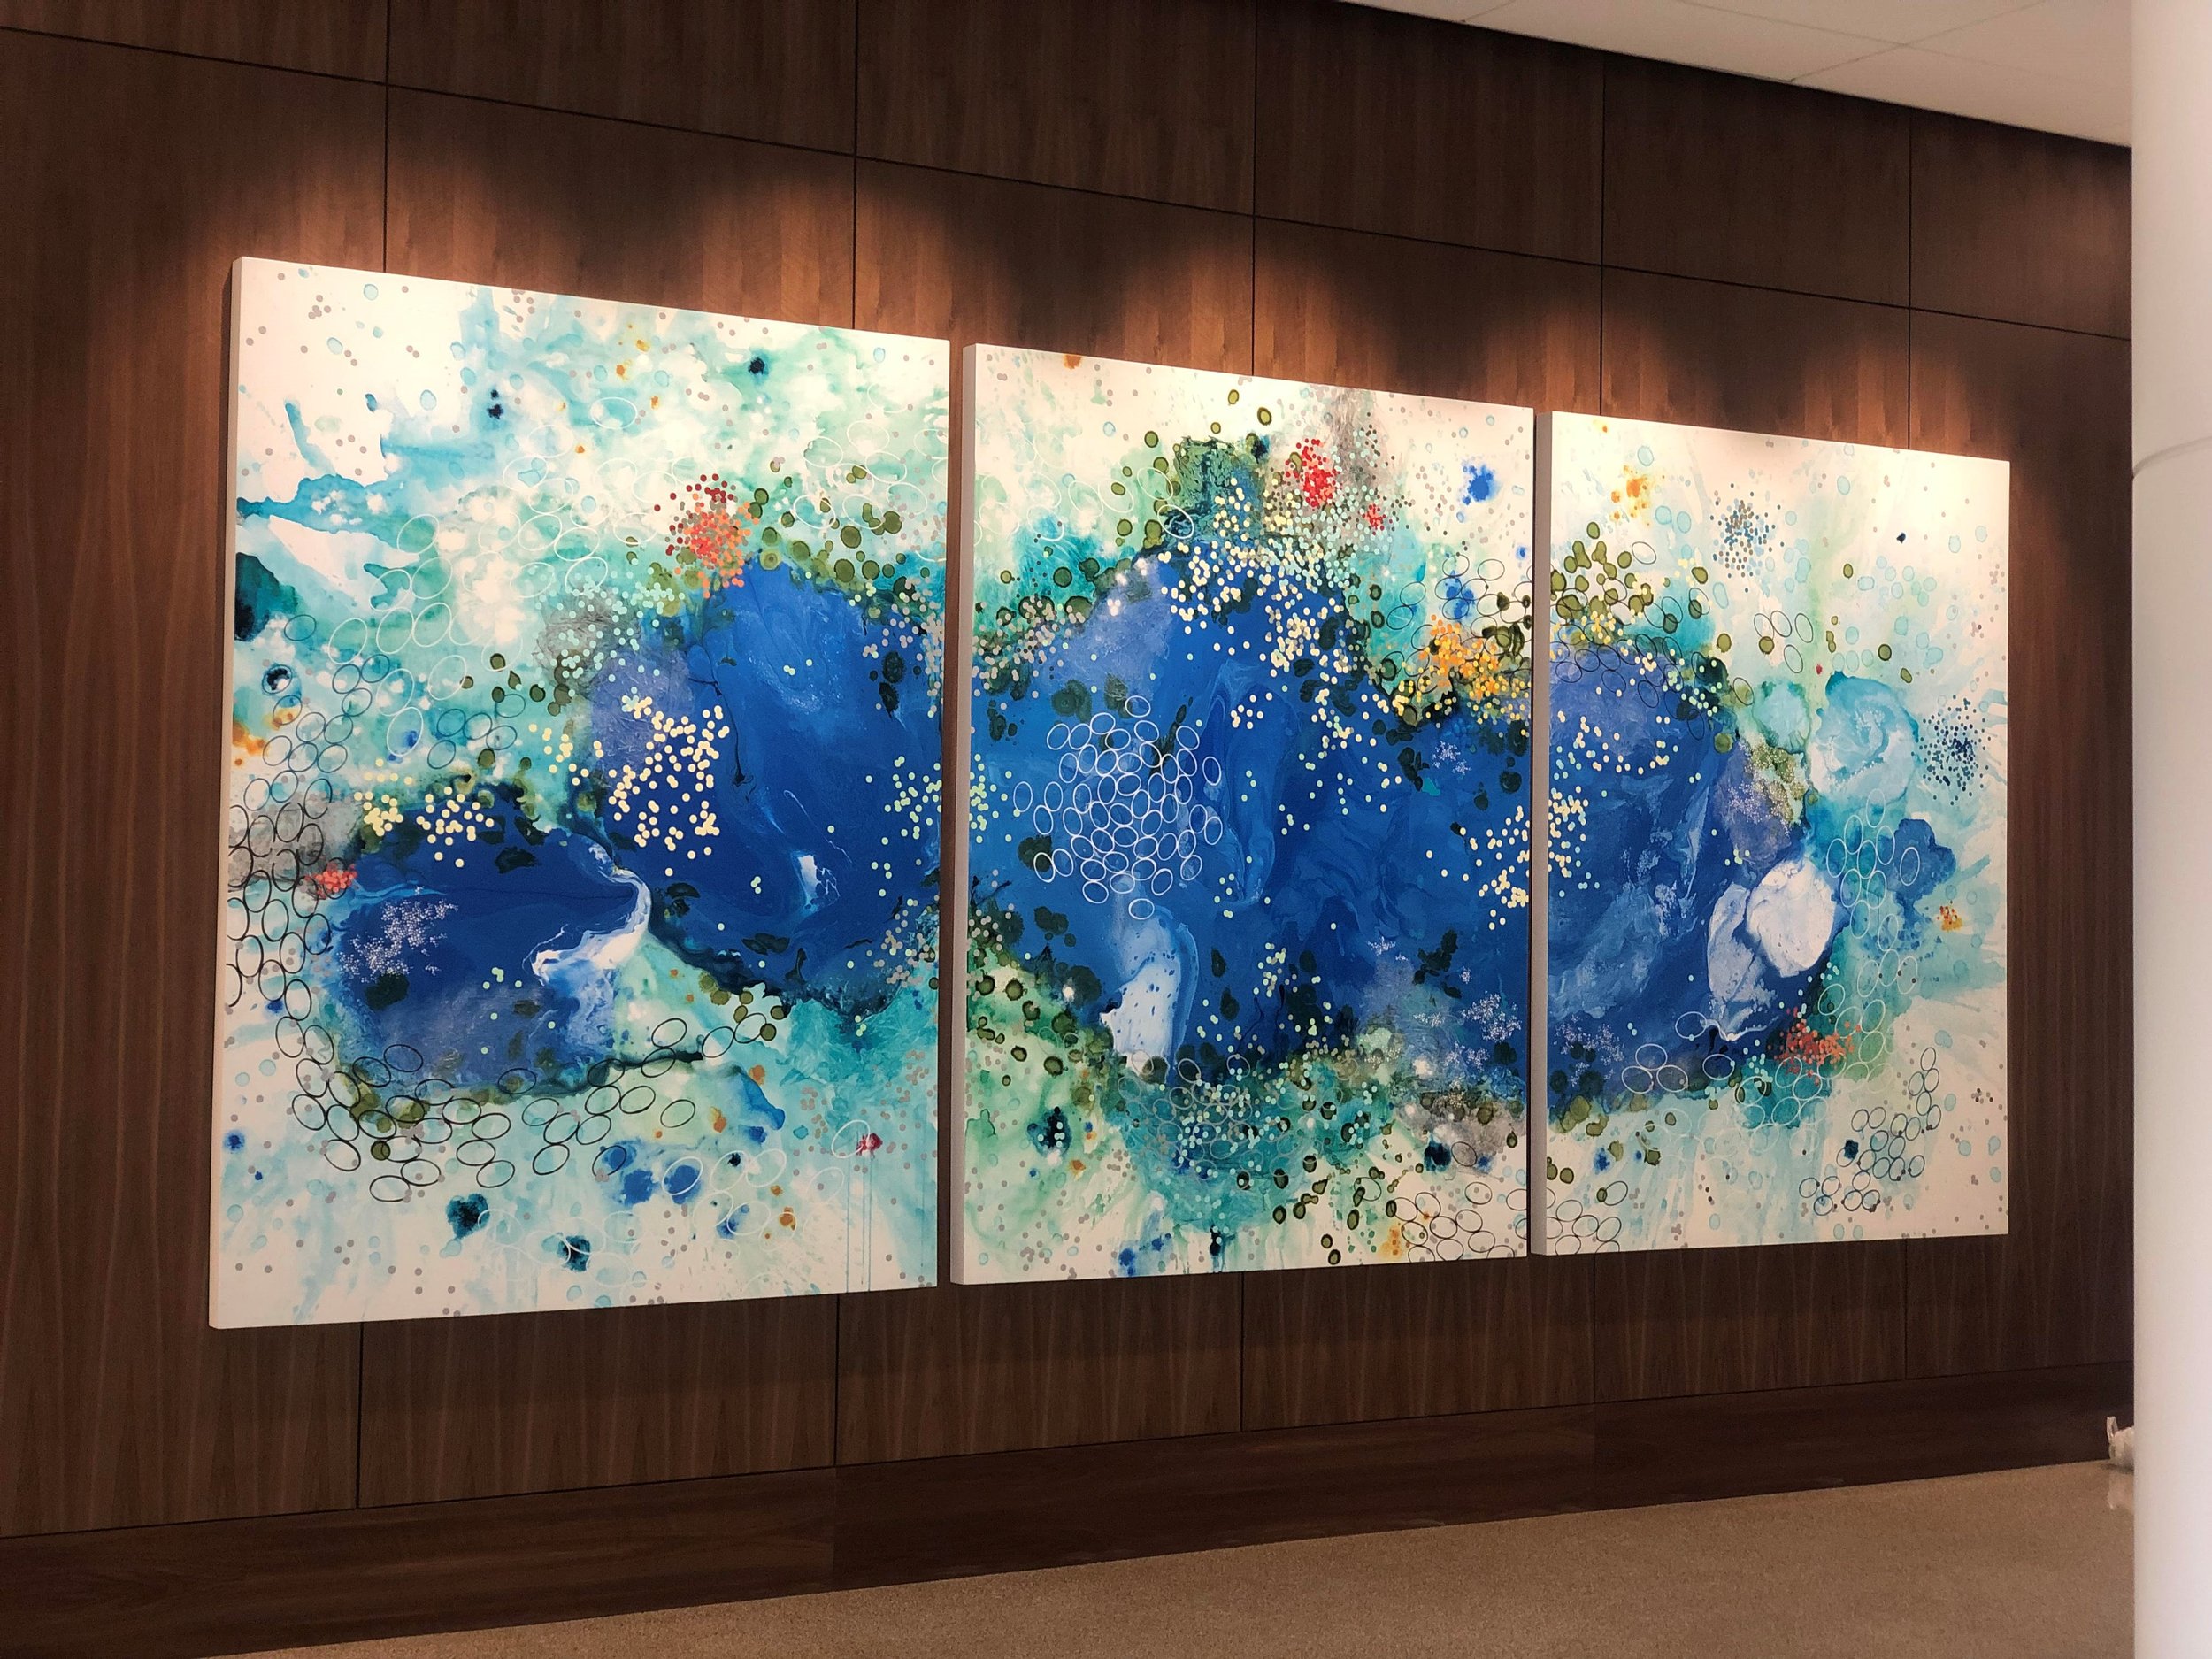  Entry of Mayo Clinic, Jacksonville, FL commissioned by Dreblow Fine Art, 8'x18' triptych 